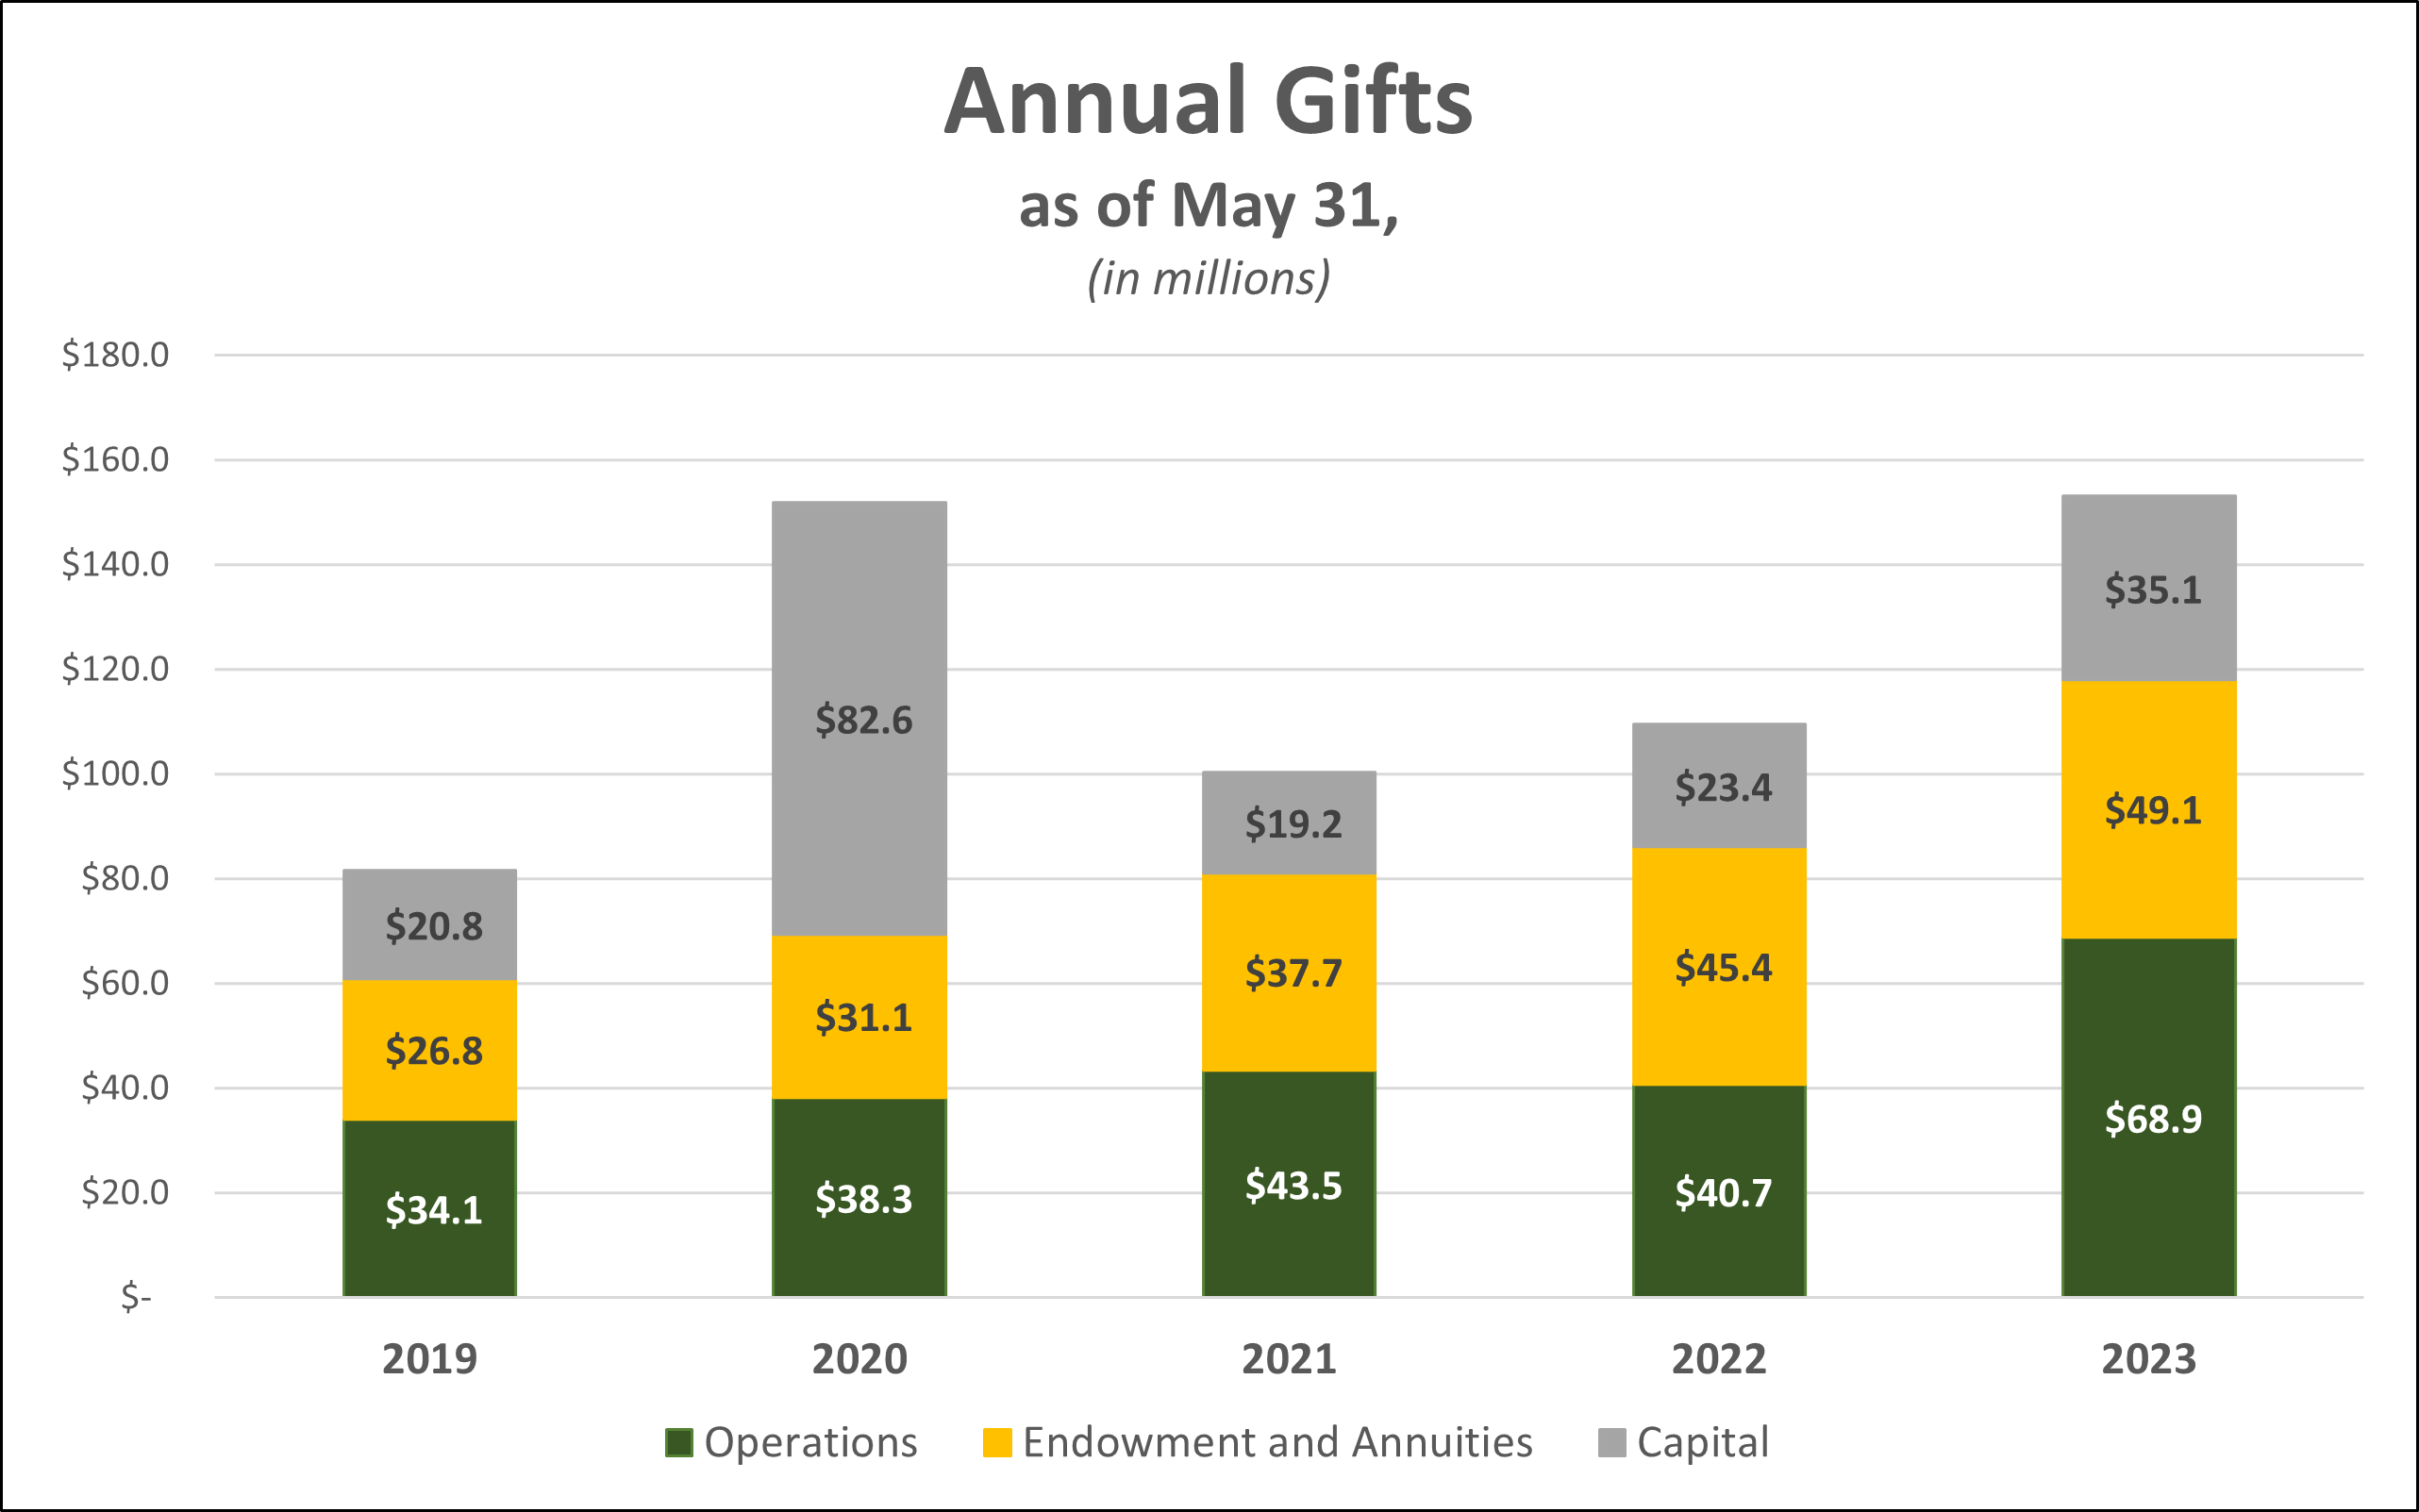 Annual Gifts as of May 31, 